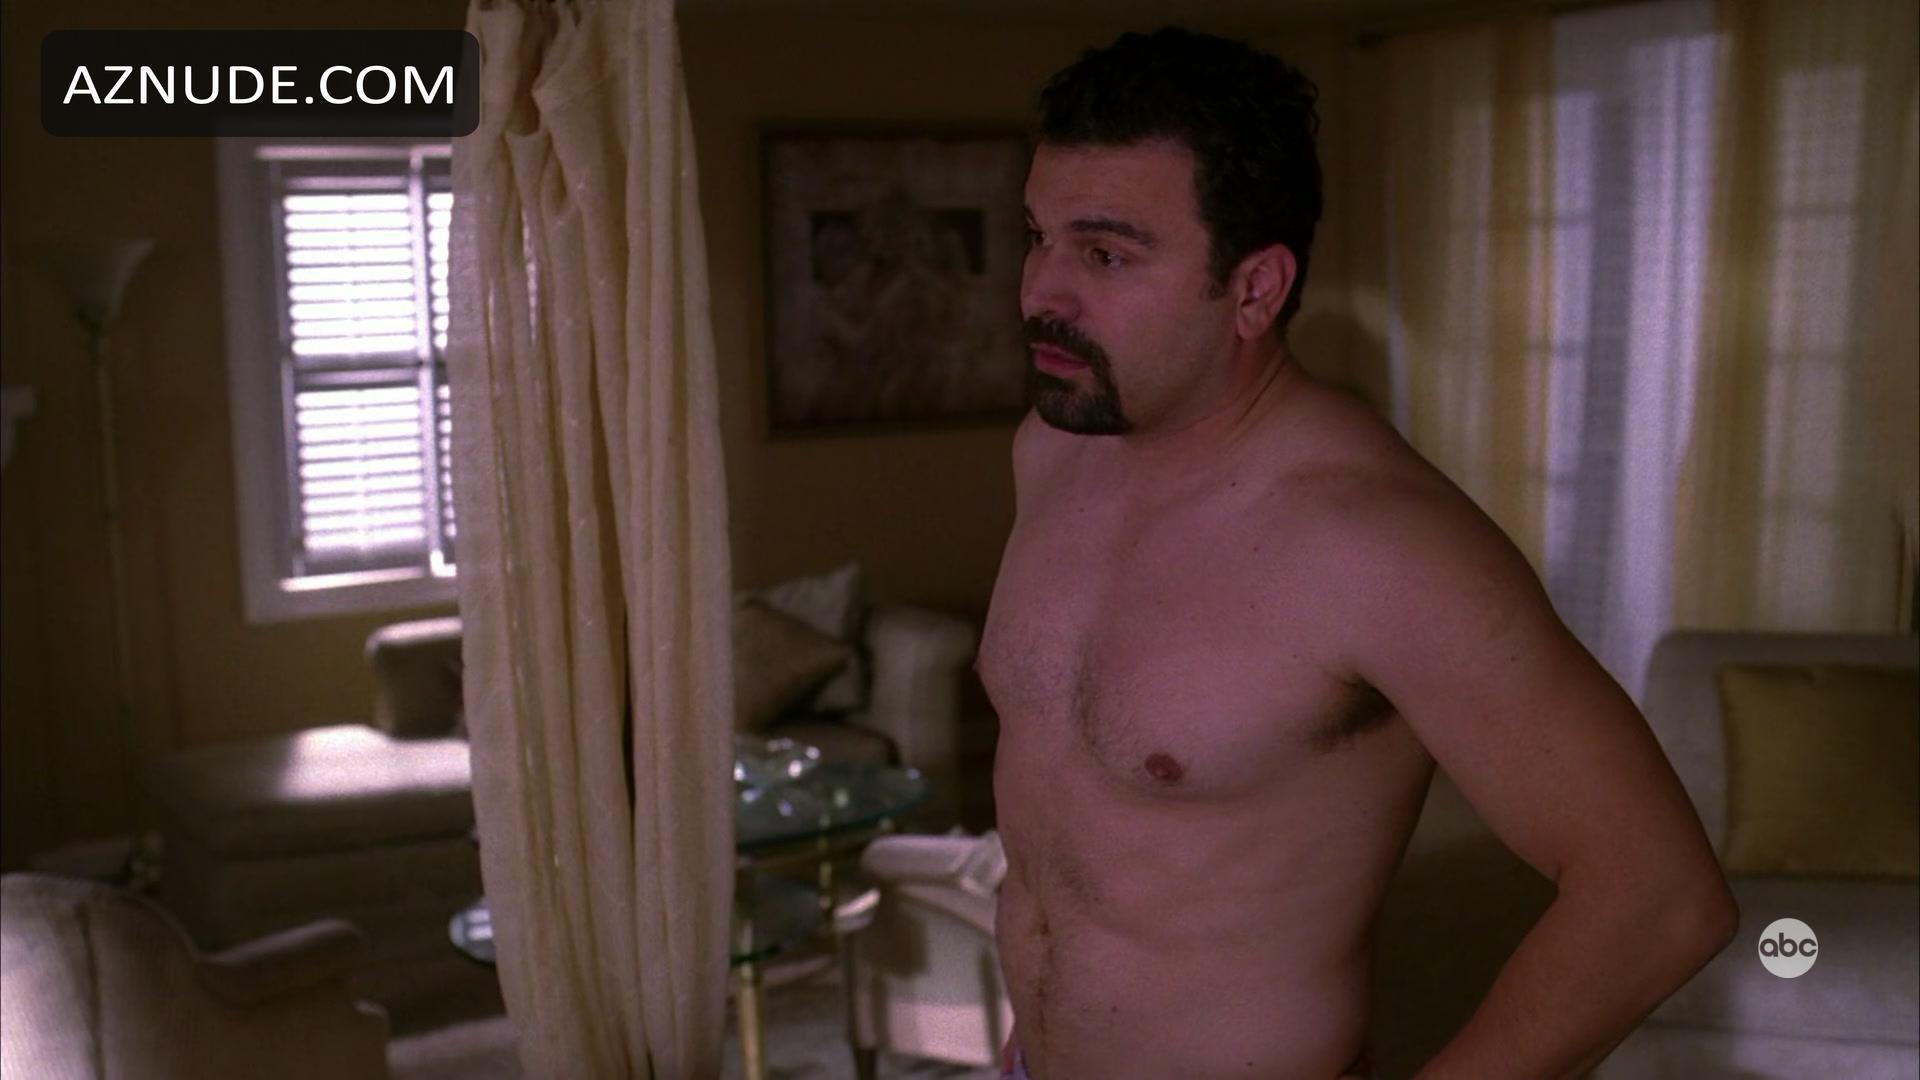 DESPERATE HOUSEWIVES NUDE SCENES pic